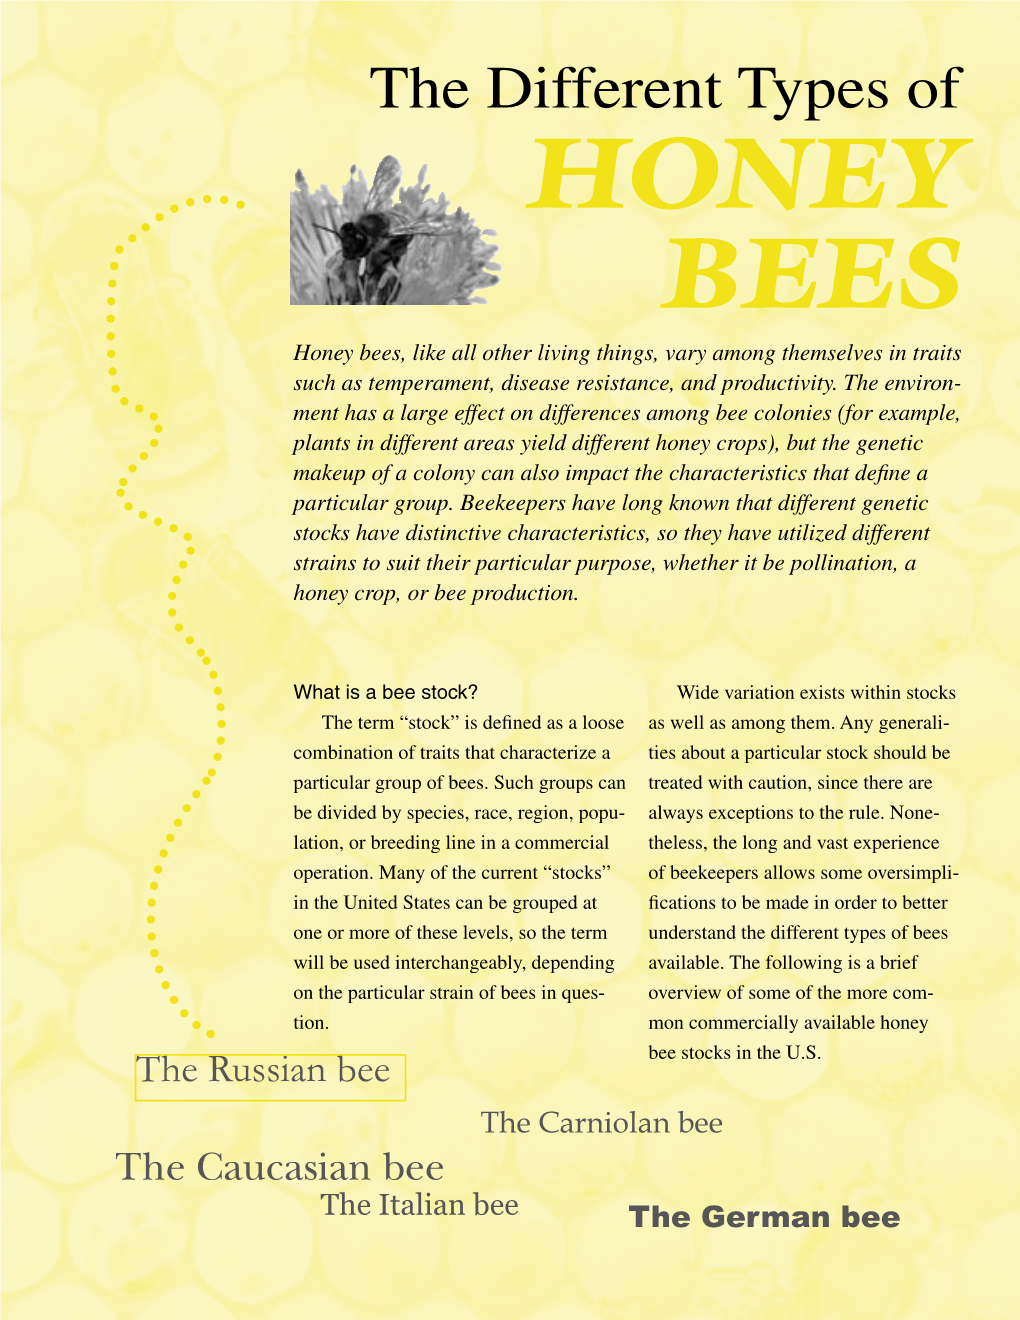 The Different Types of HONEY BEES Honey Bees, Like All Other Living Things, Vary Among Themselves in Traits Such As Temperament, Disease Resistance, and Productivity